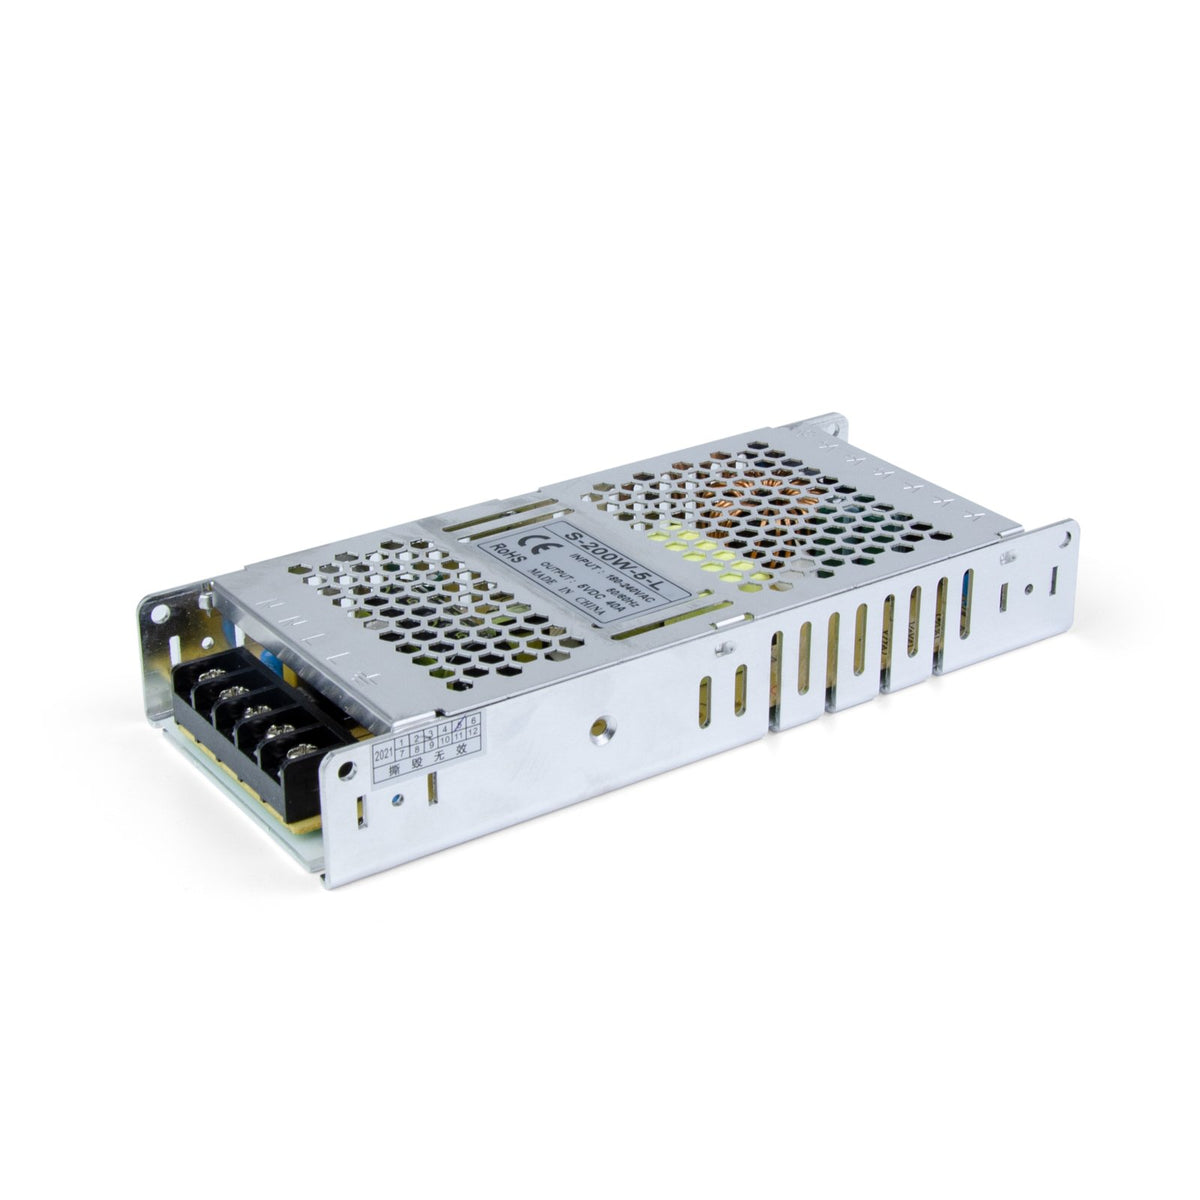 G.W.S LED Wholesale LED Drivers/LED Power Supplies IP20 (Non-Waterproof) 5V 40A 200W LED Driver